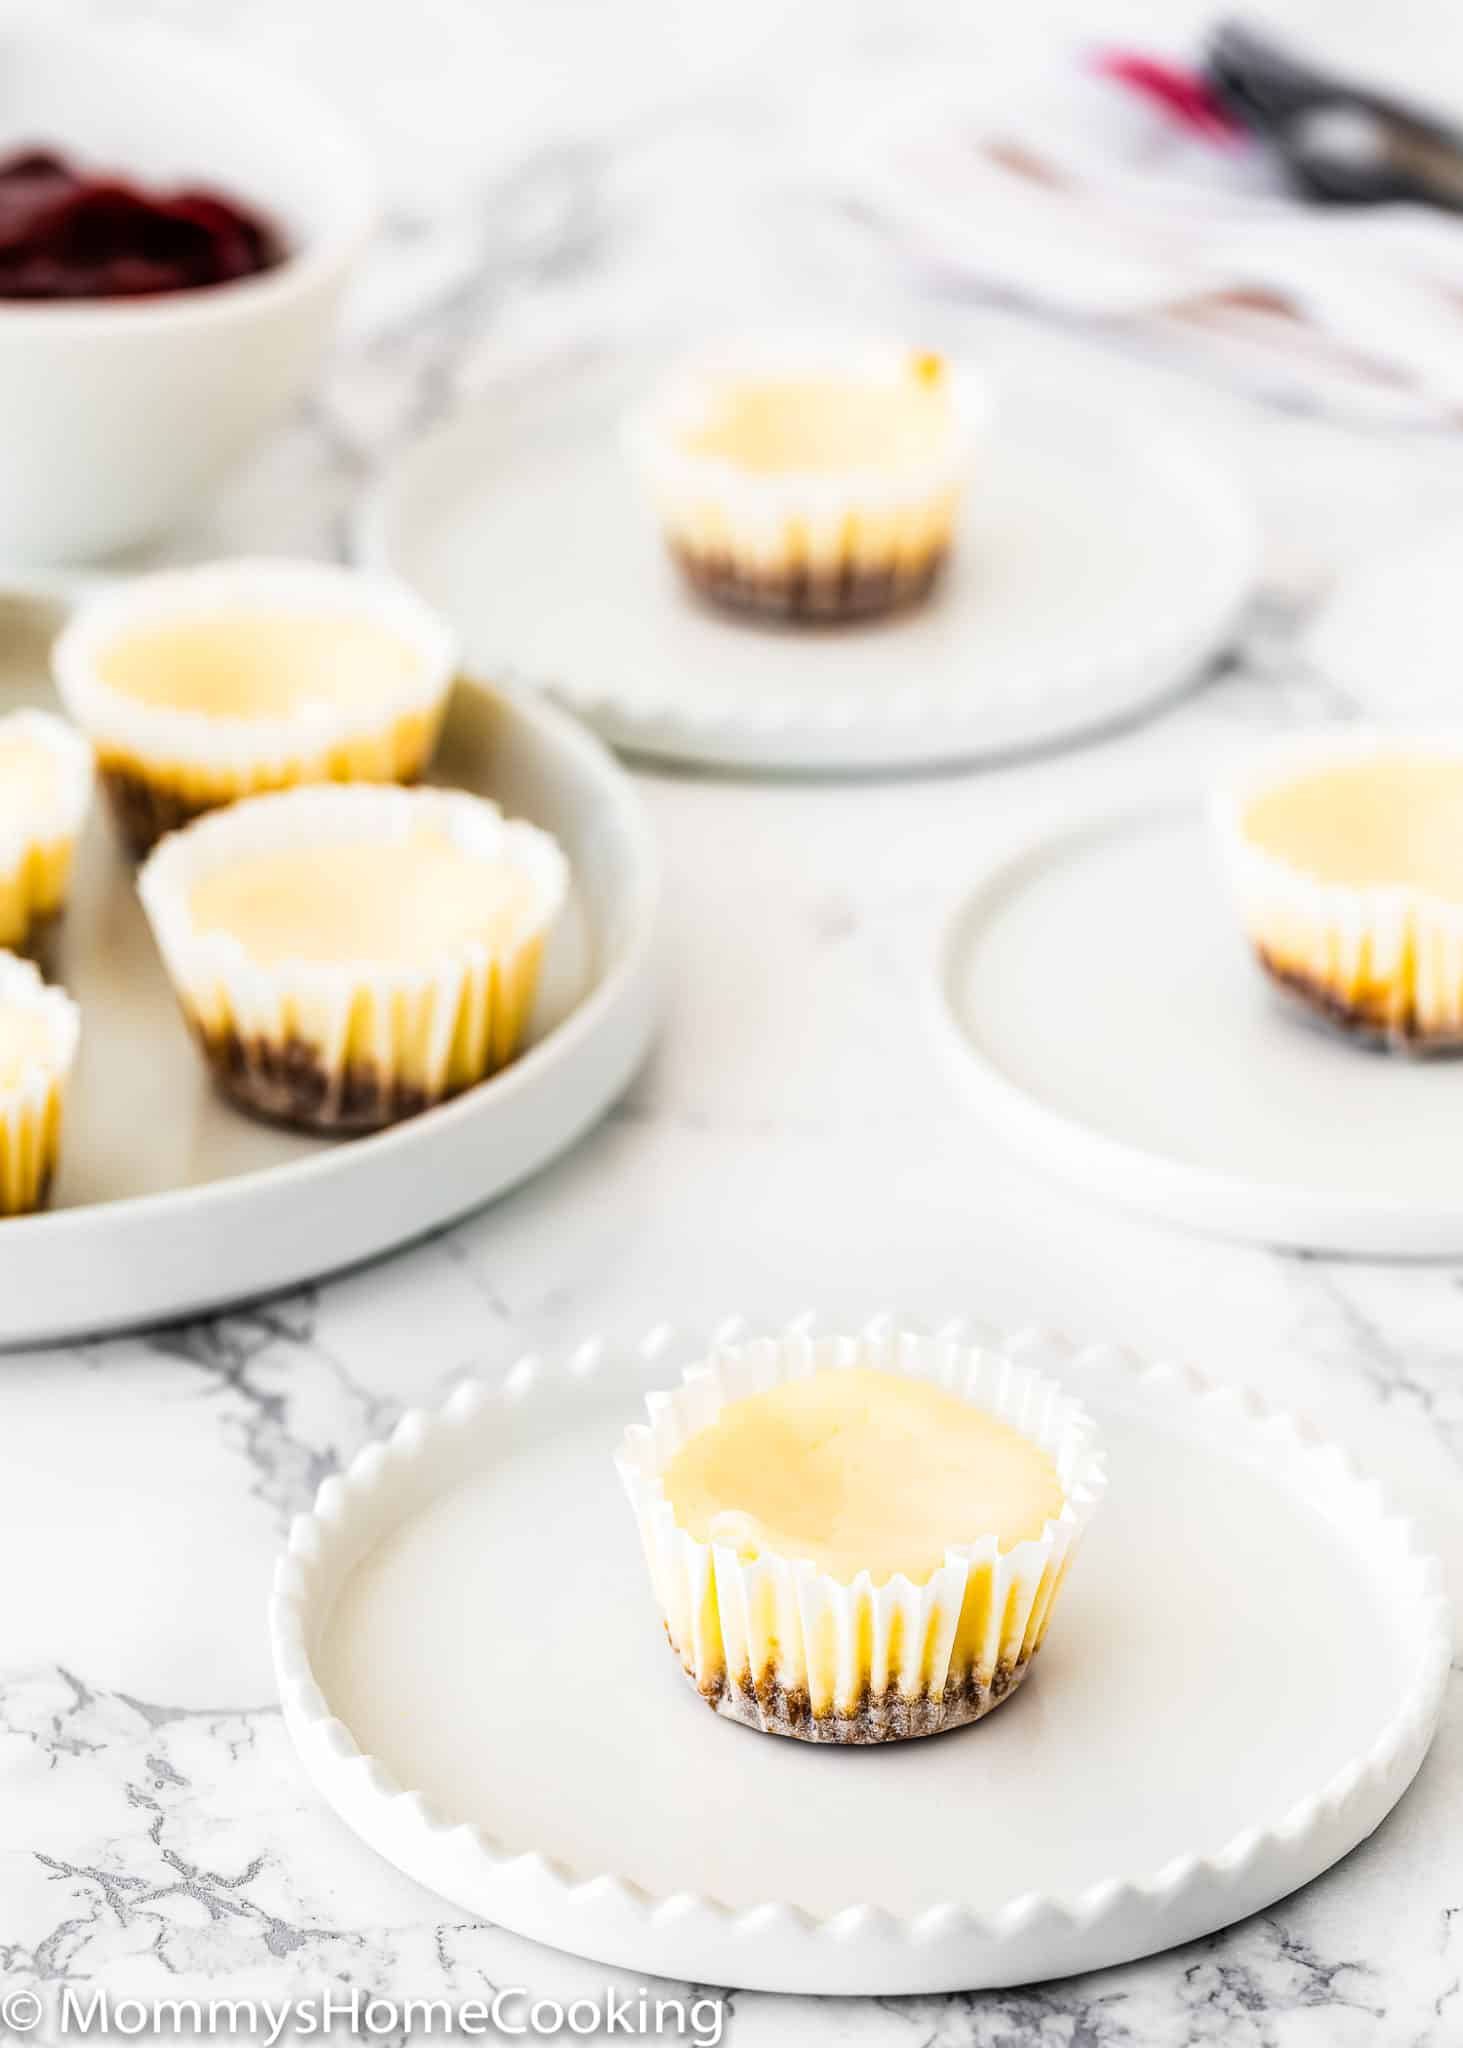 Easy Eggless Mini Cheesecakes - Mommy's Home Cooking